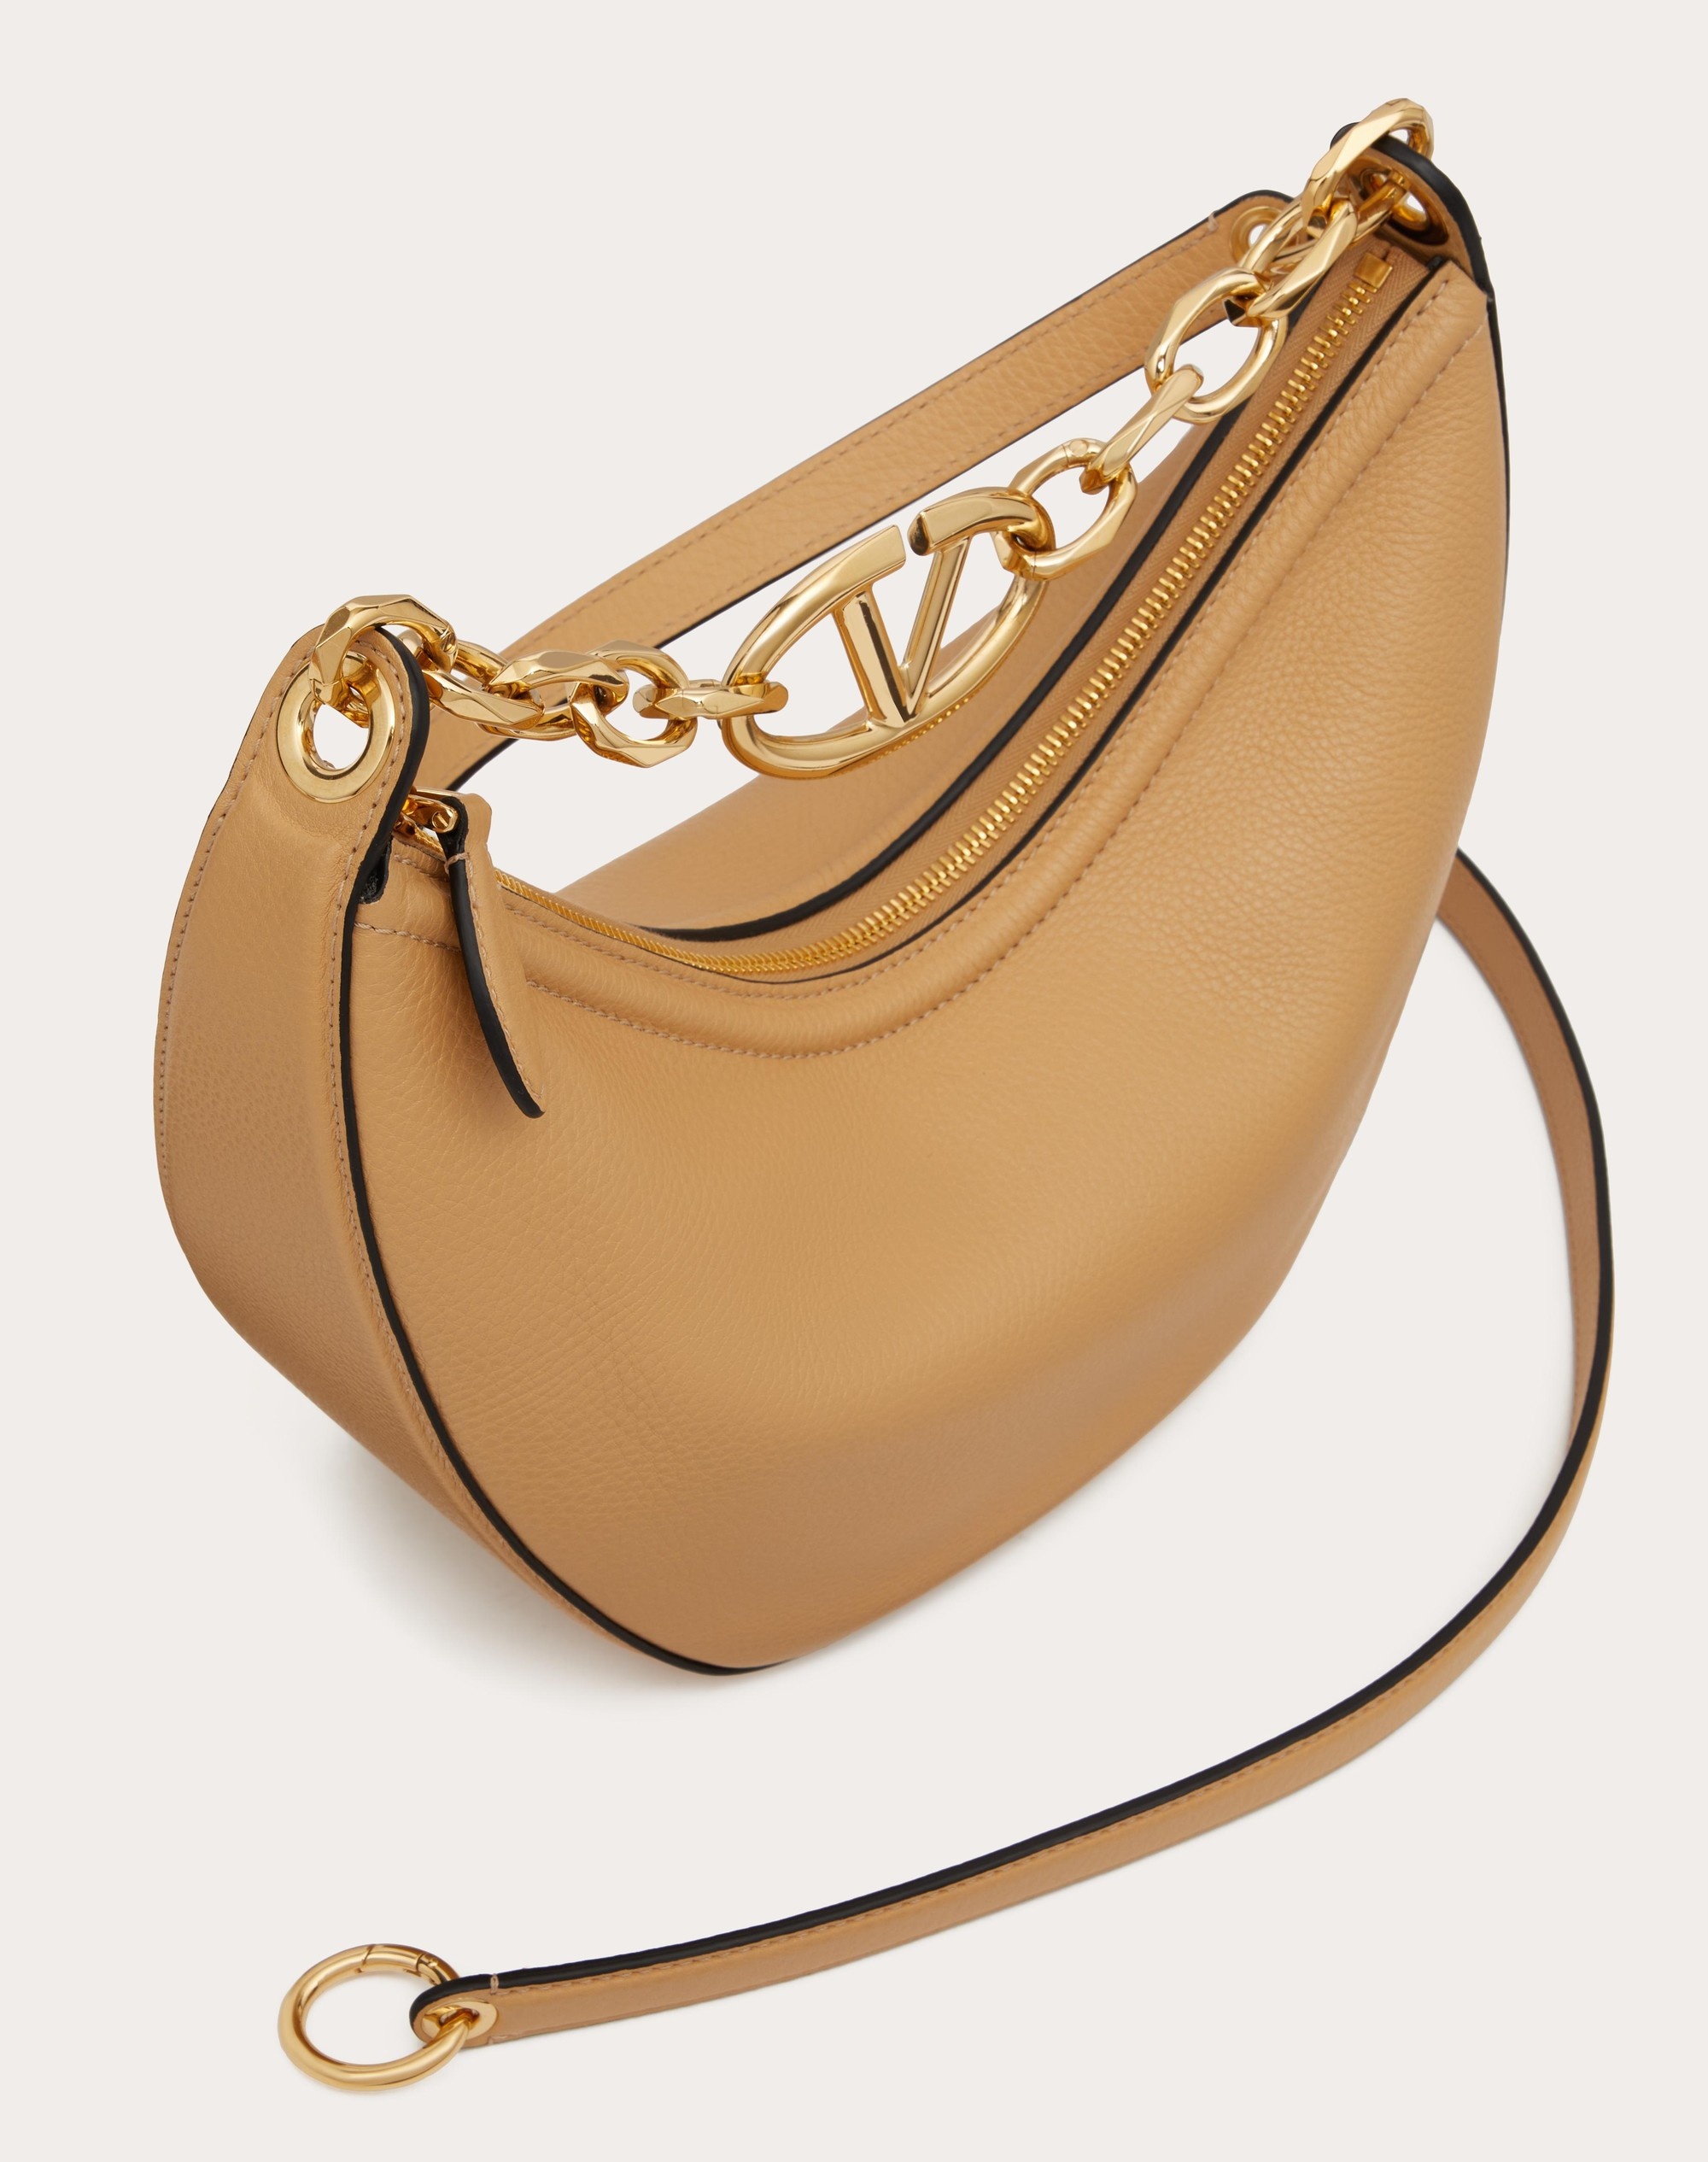 SMALL VLOGO MOON HOBO BAG IN GRAINY CALFSKIN WITH CHAIN - 5